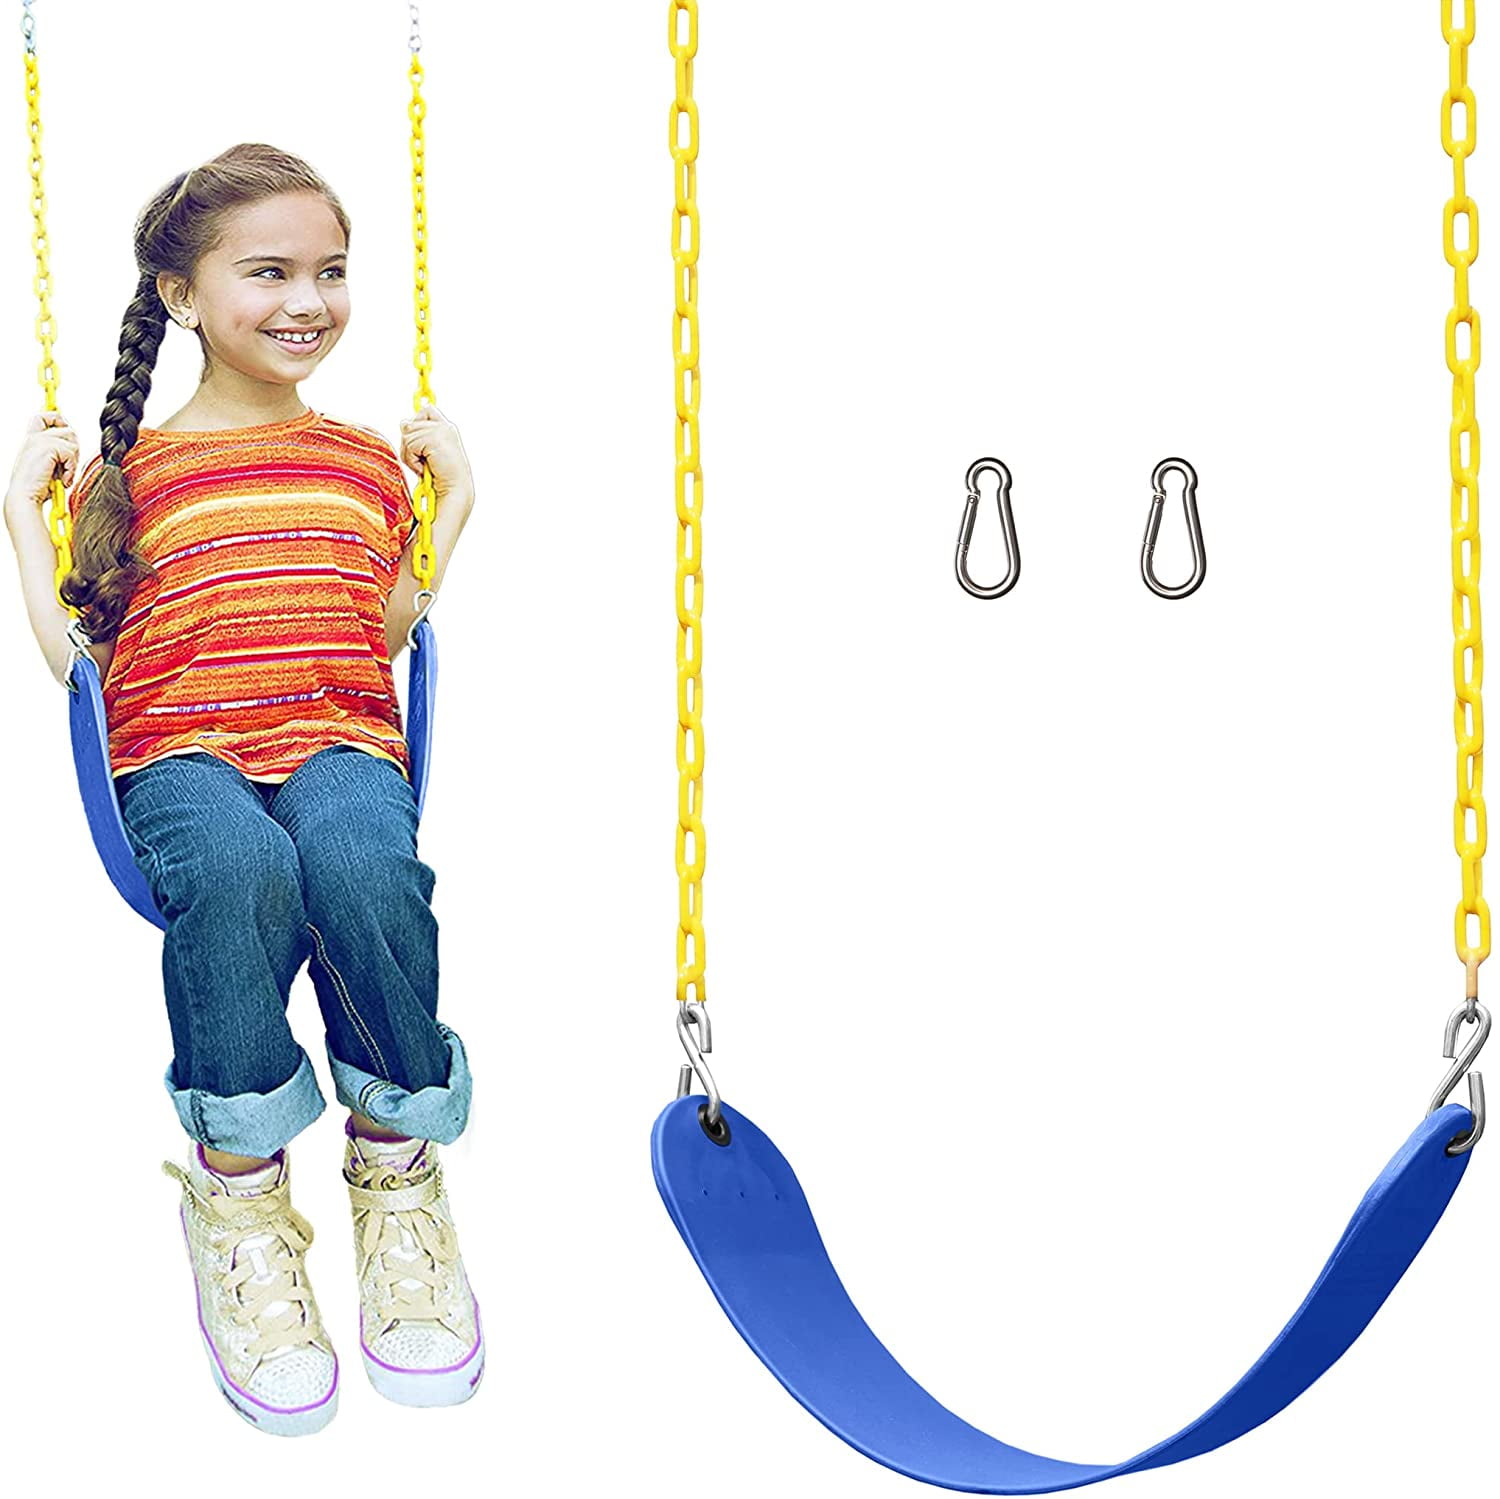 Swing Set Swing Seat Accessories Replacement Swings Slides w/ Chains & Hooks US 